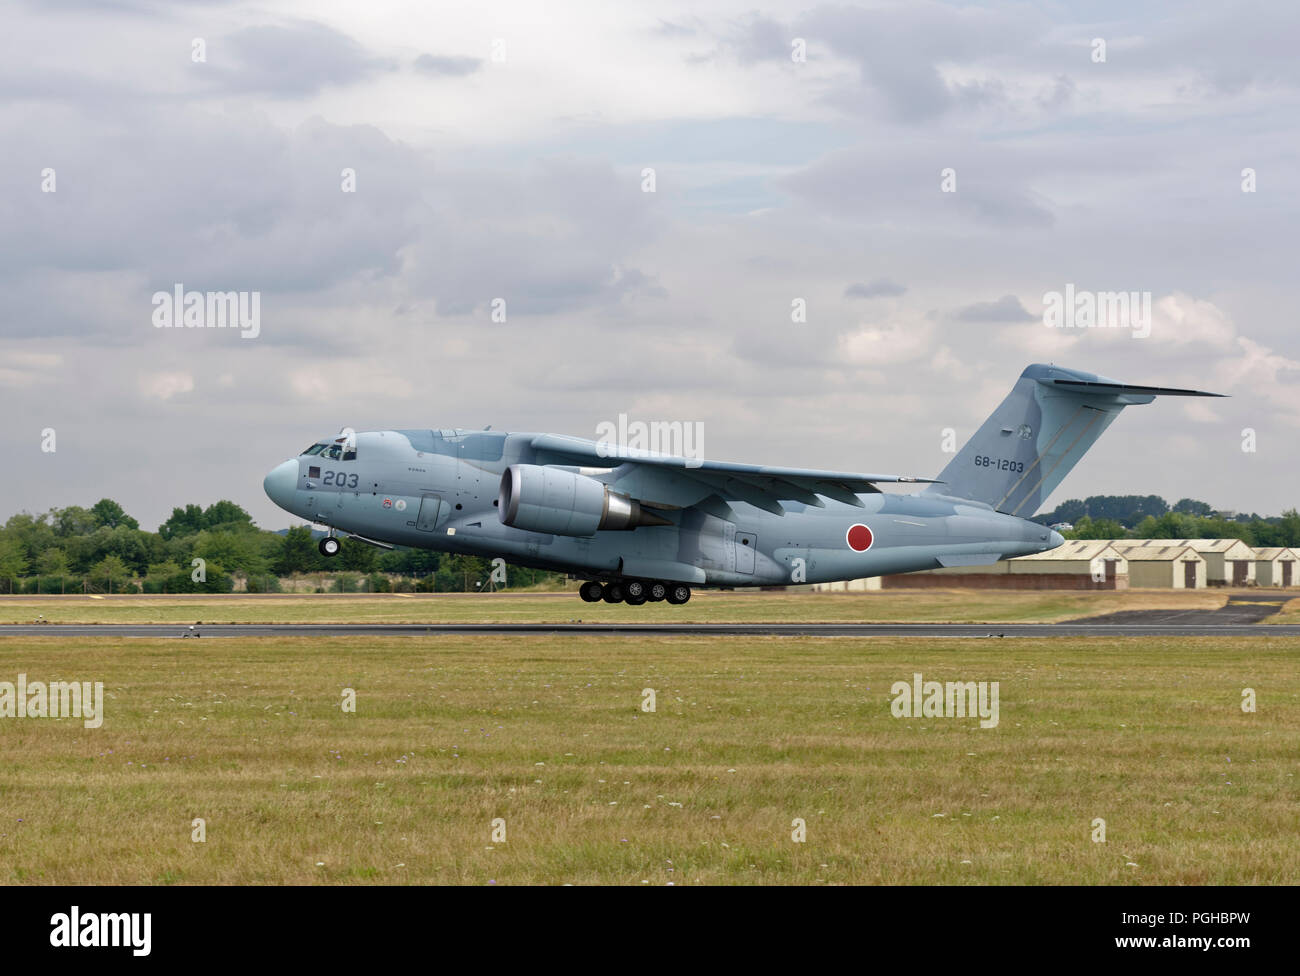 The Japanese Air Self Defence Force's new military freight aircraft, the Kawasaki C-2 twinjet takes off from RAF Fairford after the RIAT Stock Photo